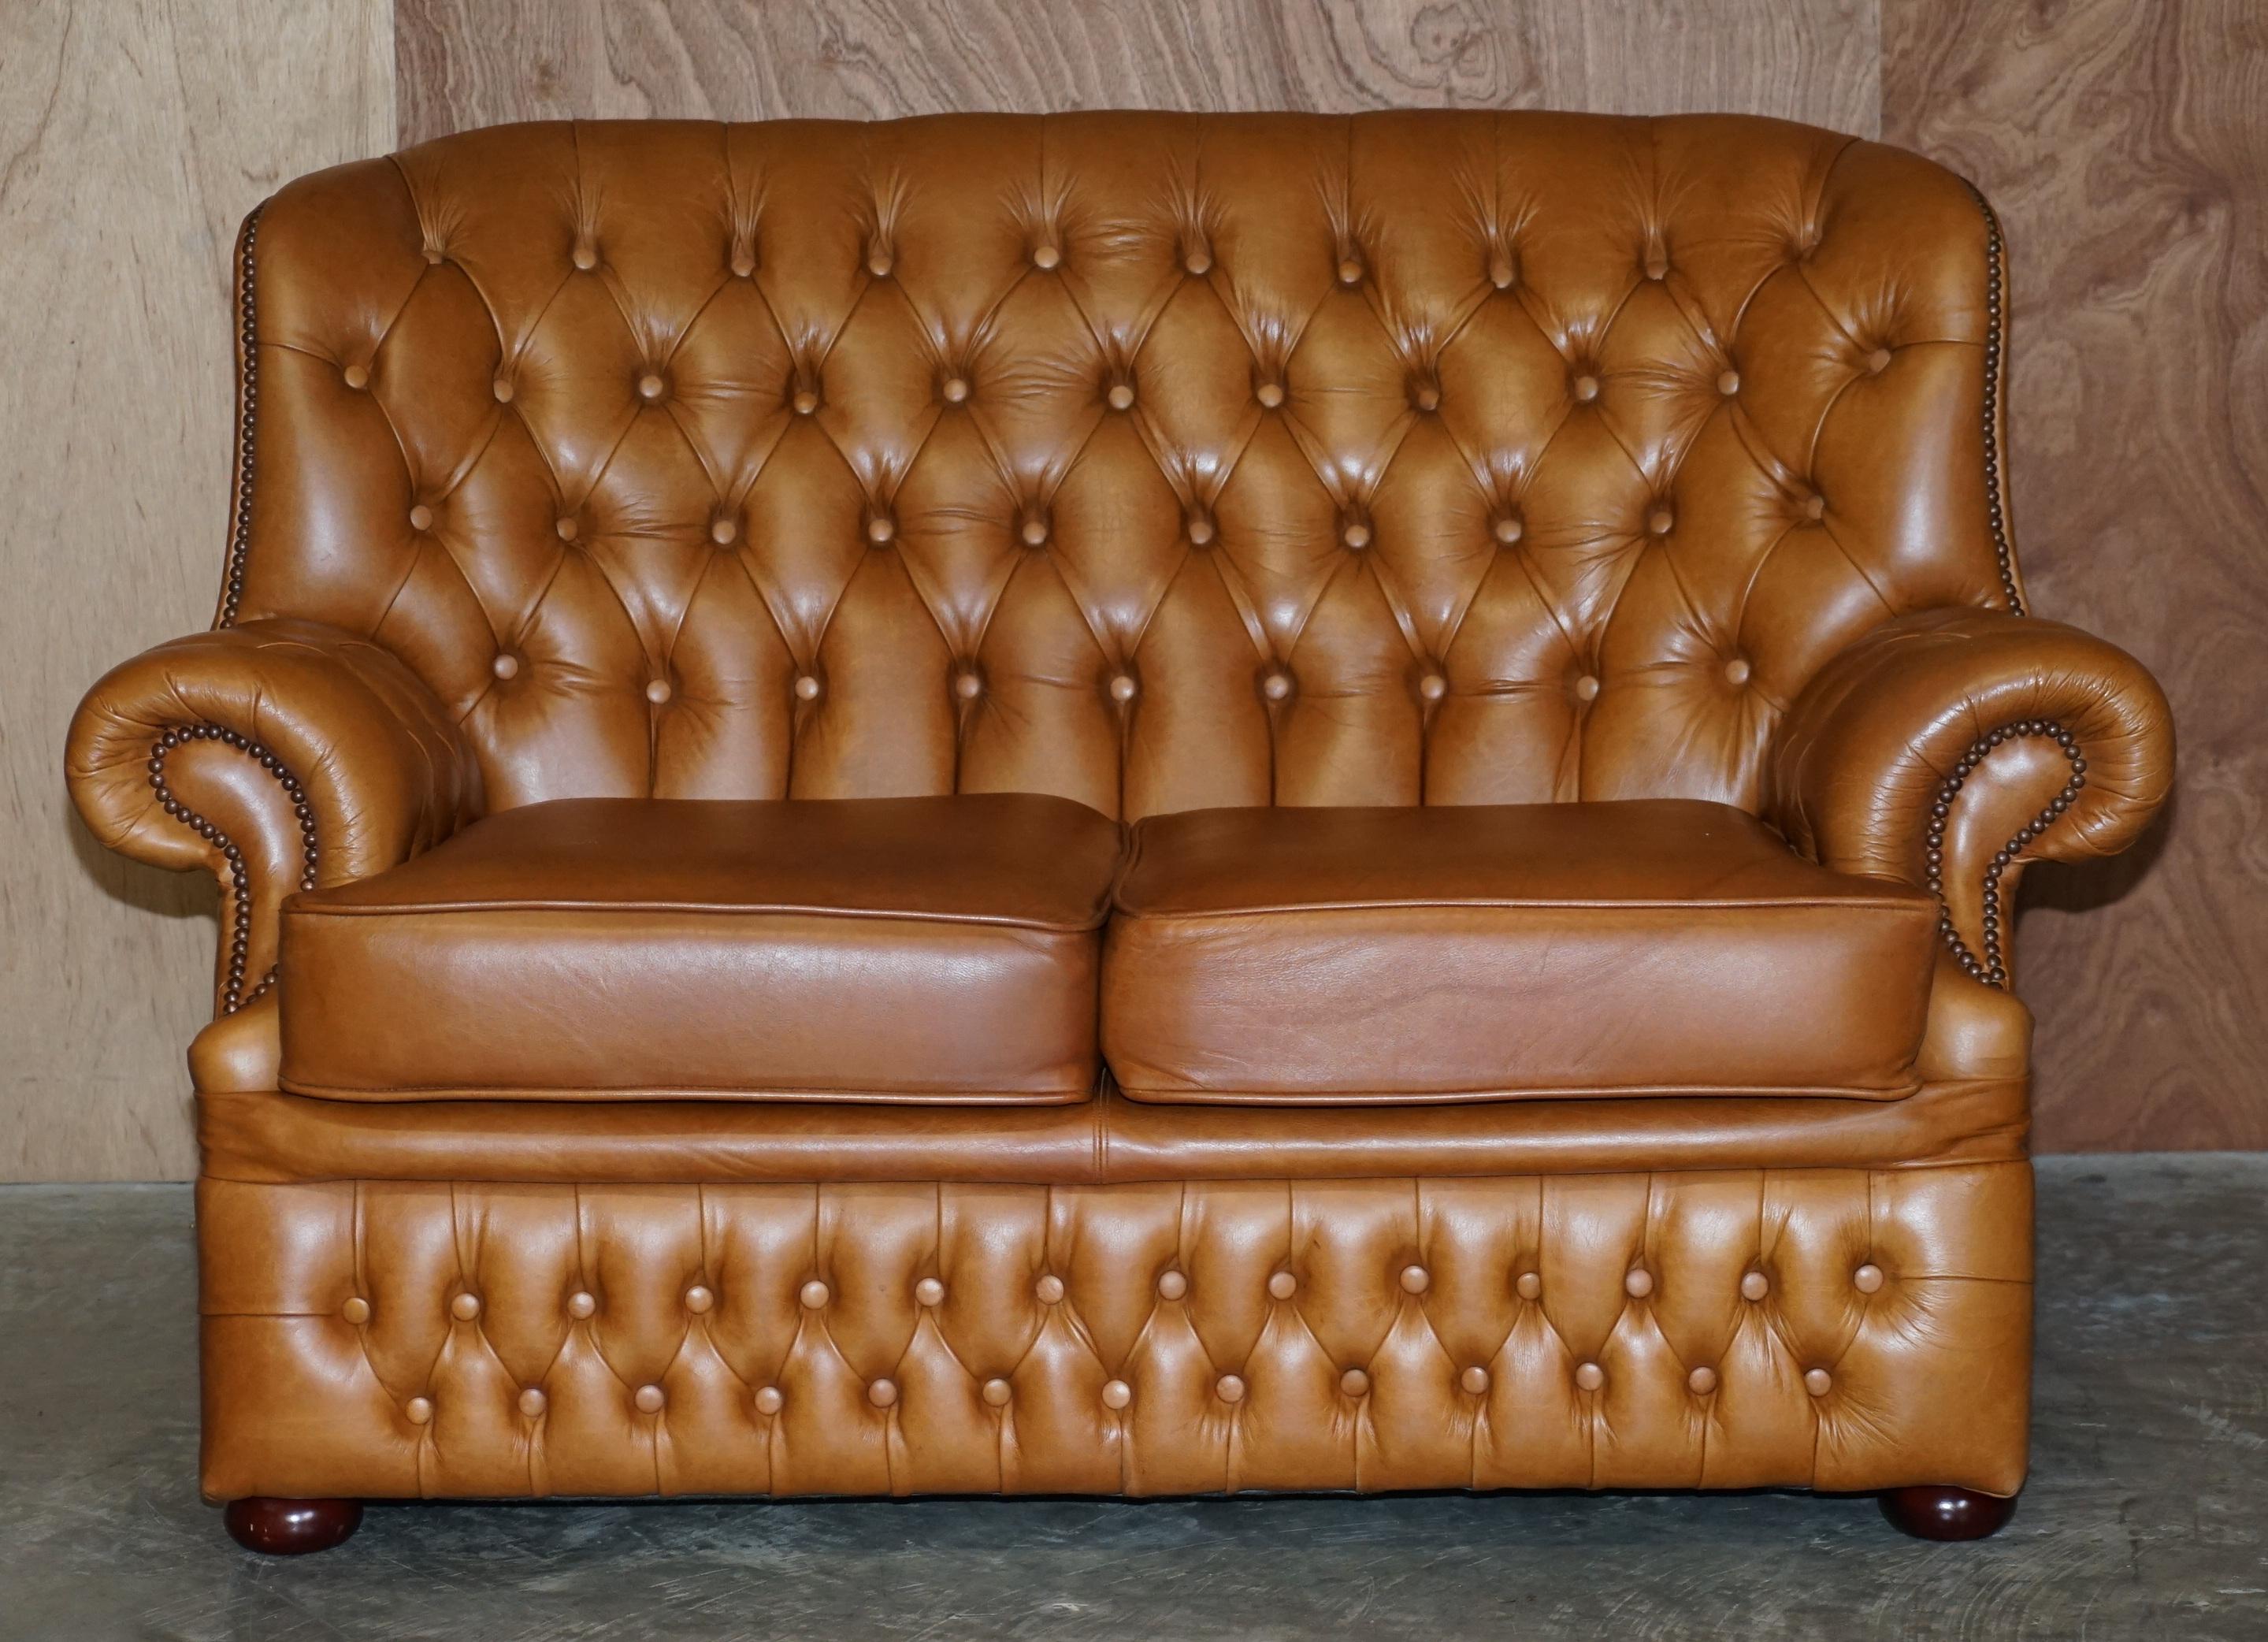 We are delighted to offer this very nice tan brown leather Chesterfield sofa

This is a very comfortable and good looking sofa, it has a high back so you can rest your whole back including head. The upholstery is very nice, it’s a biker tan